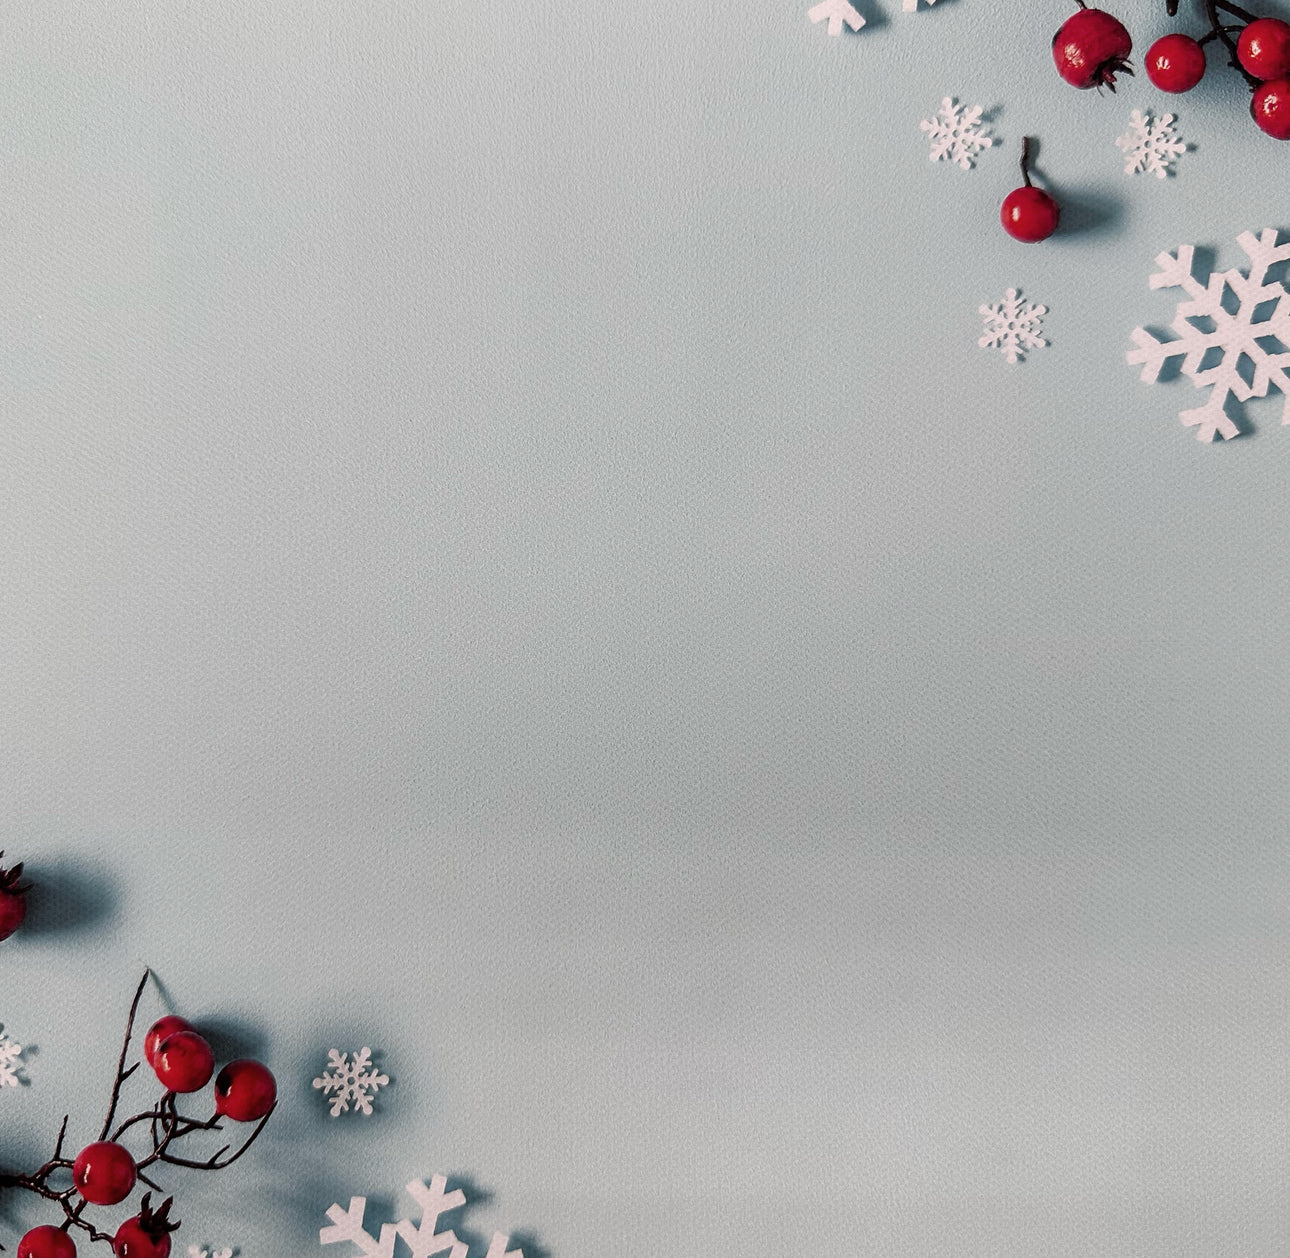 Festive Berries Canvas Photography Background